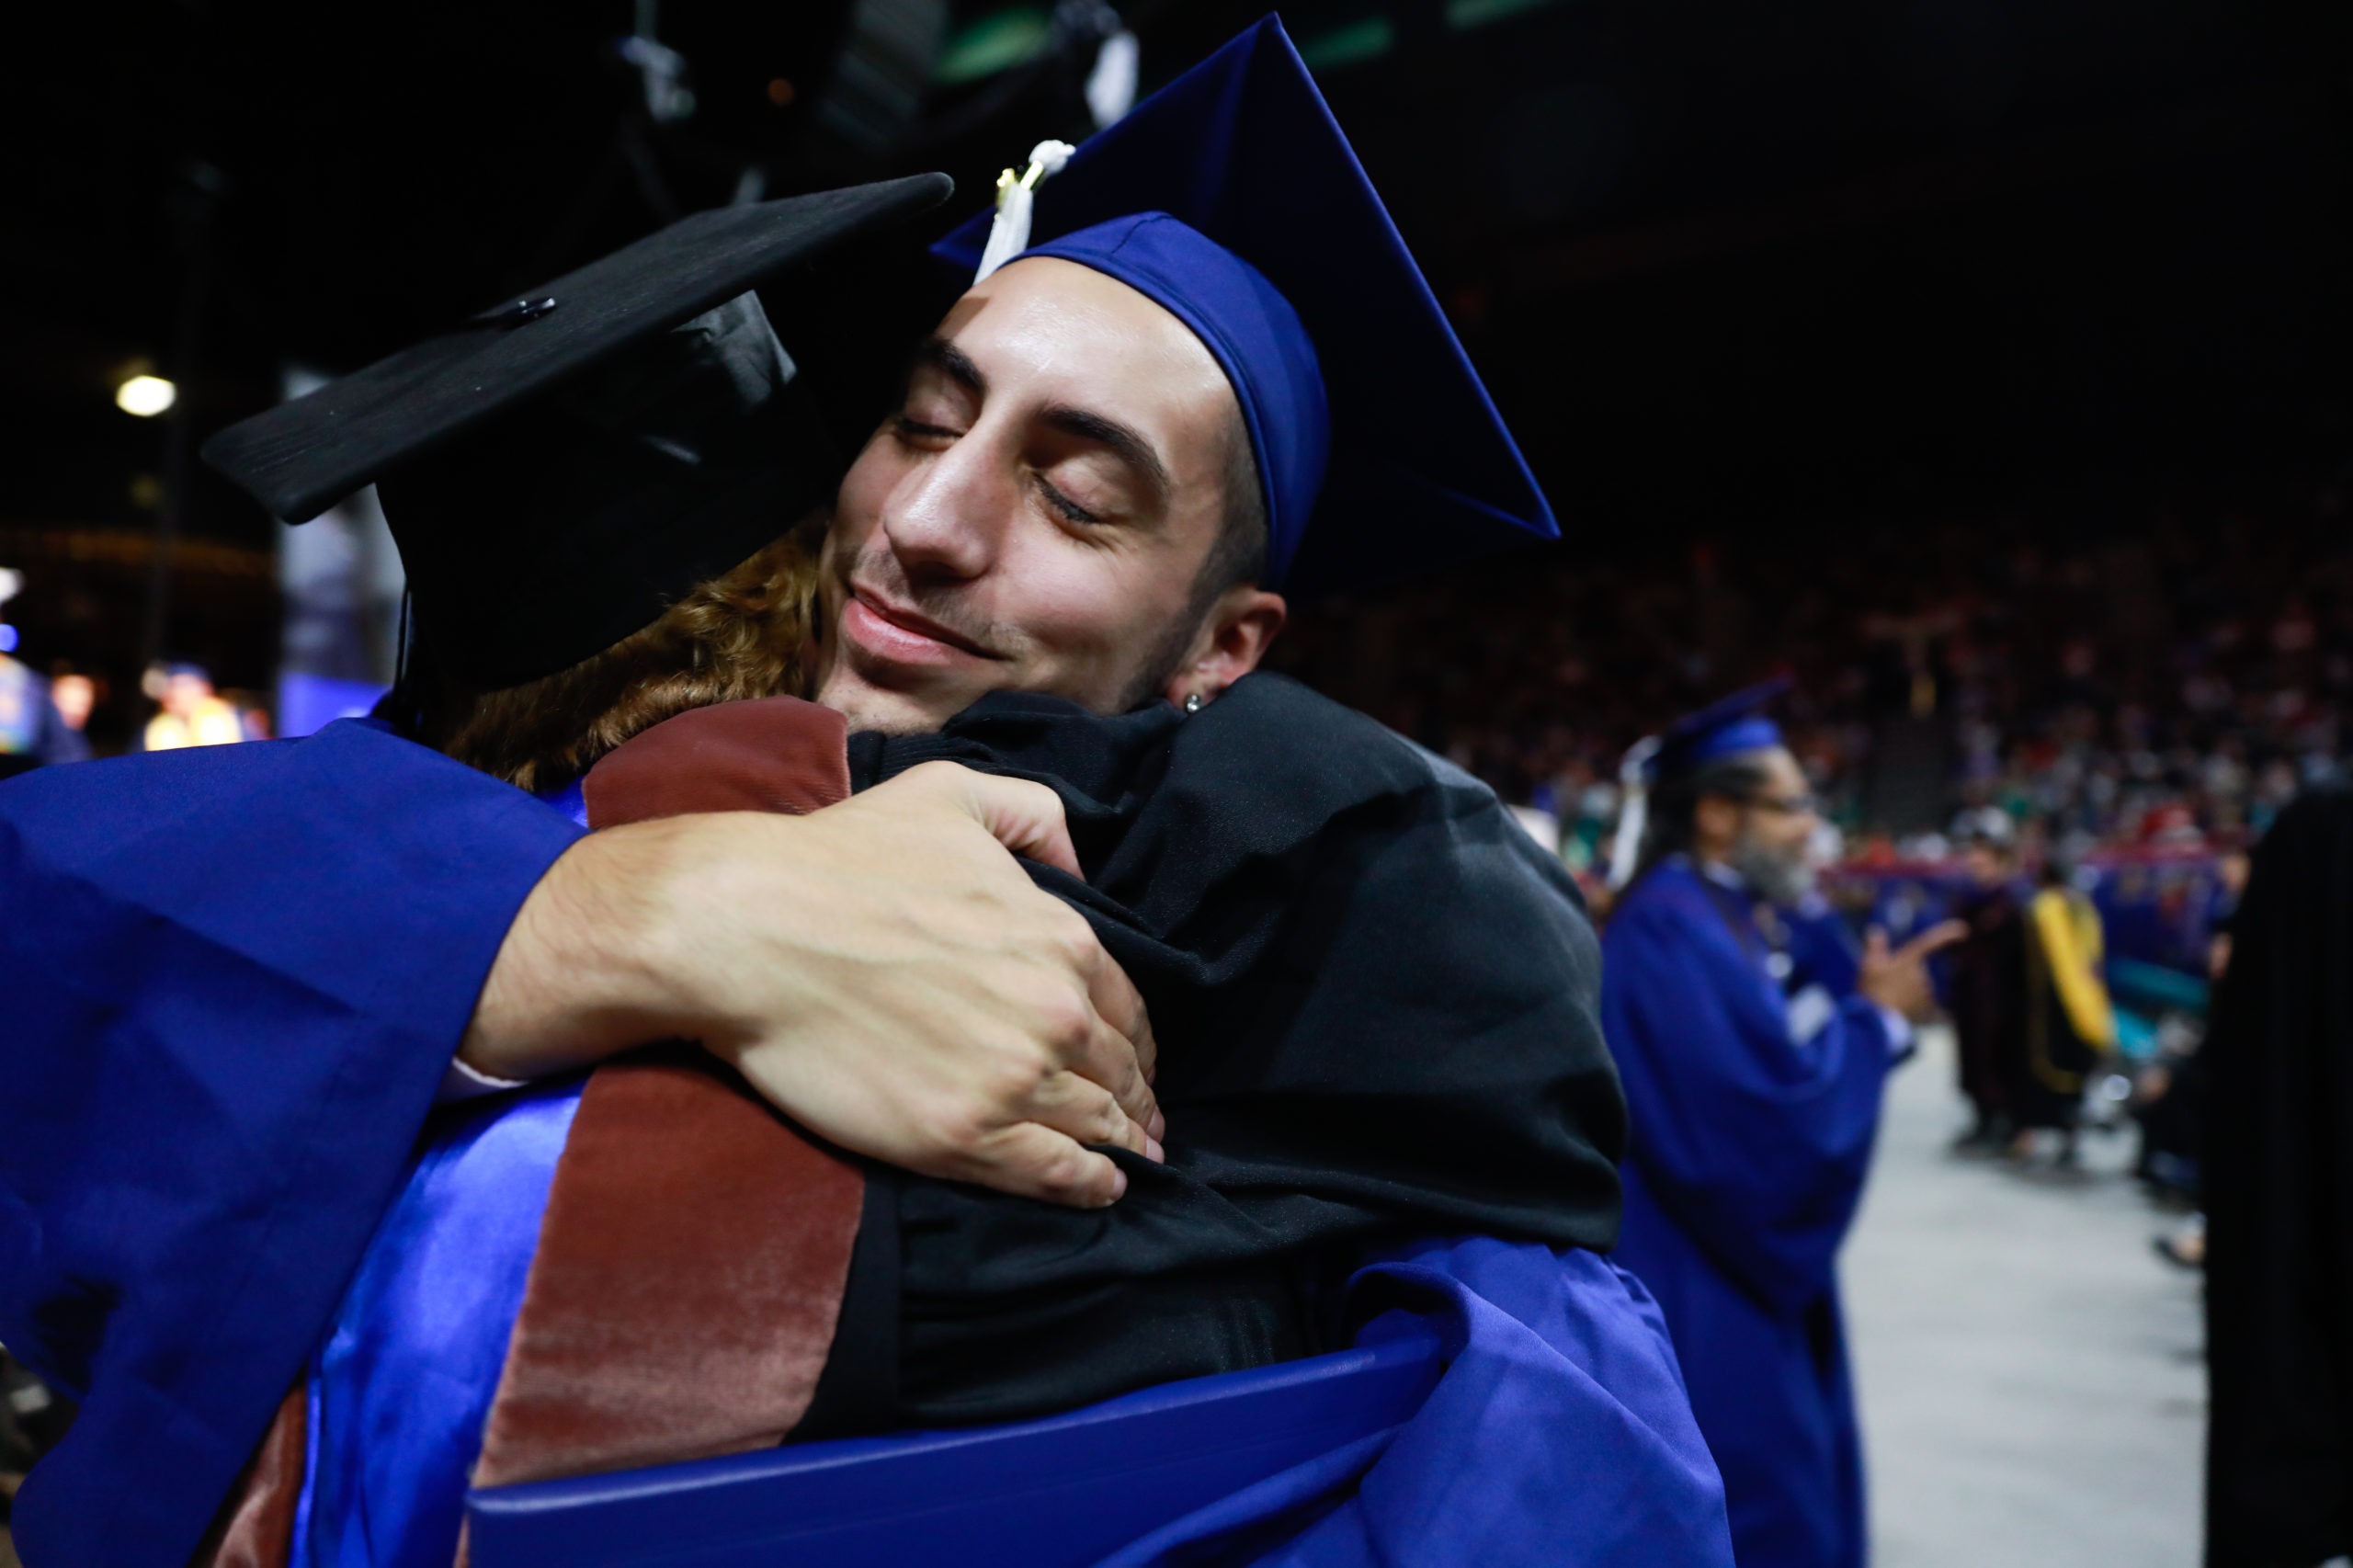 A faculty member hugs a student